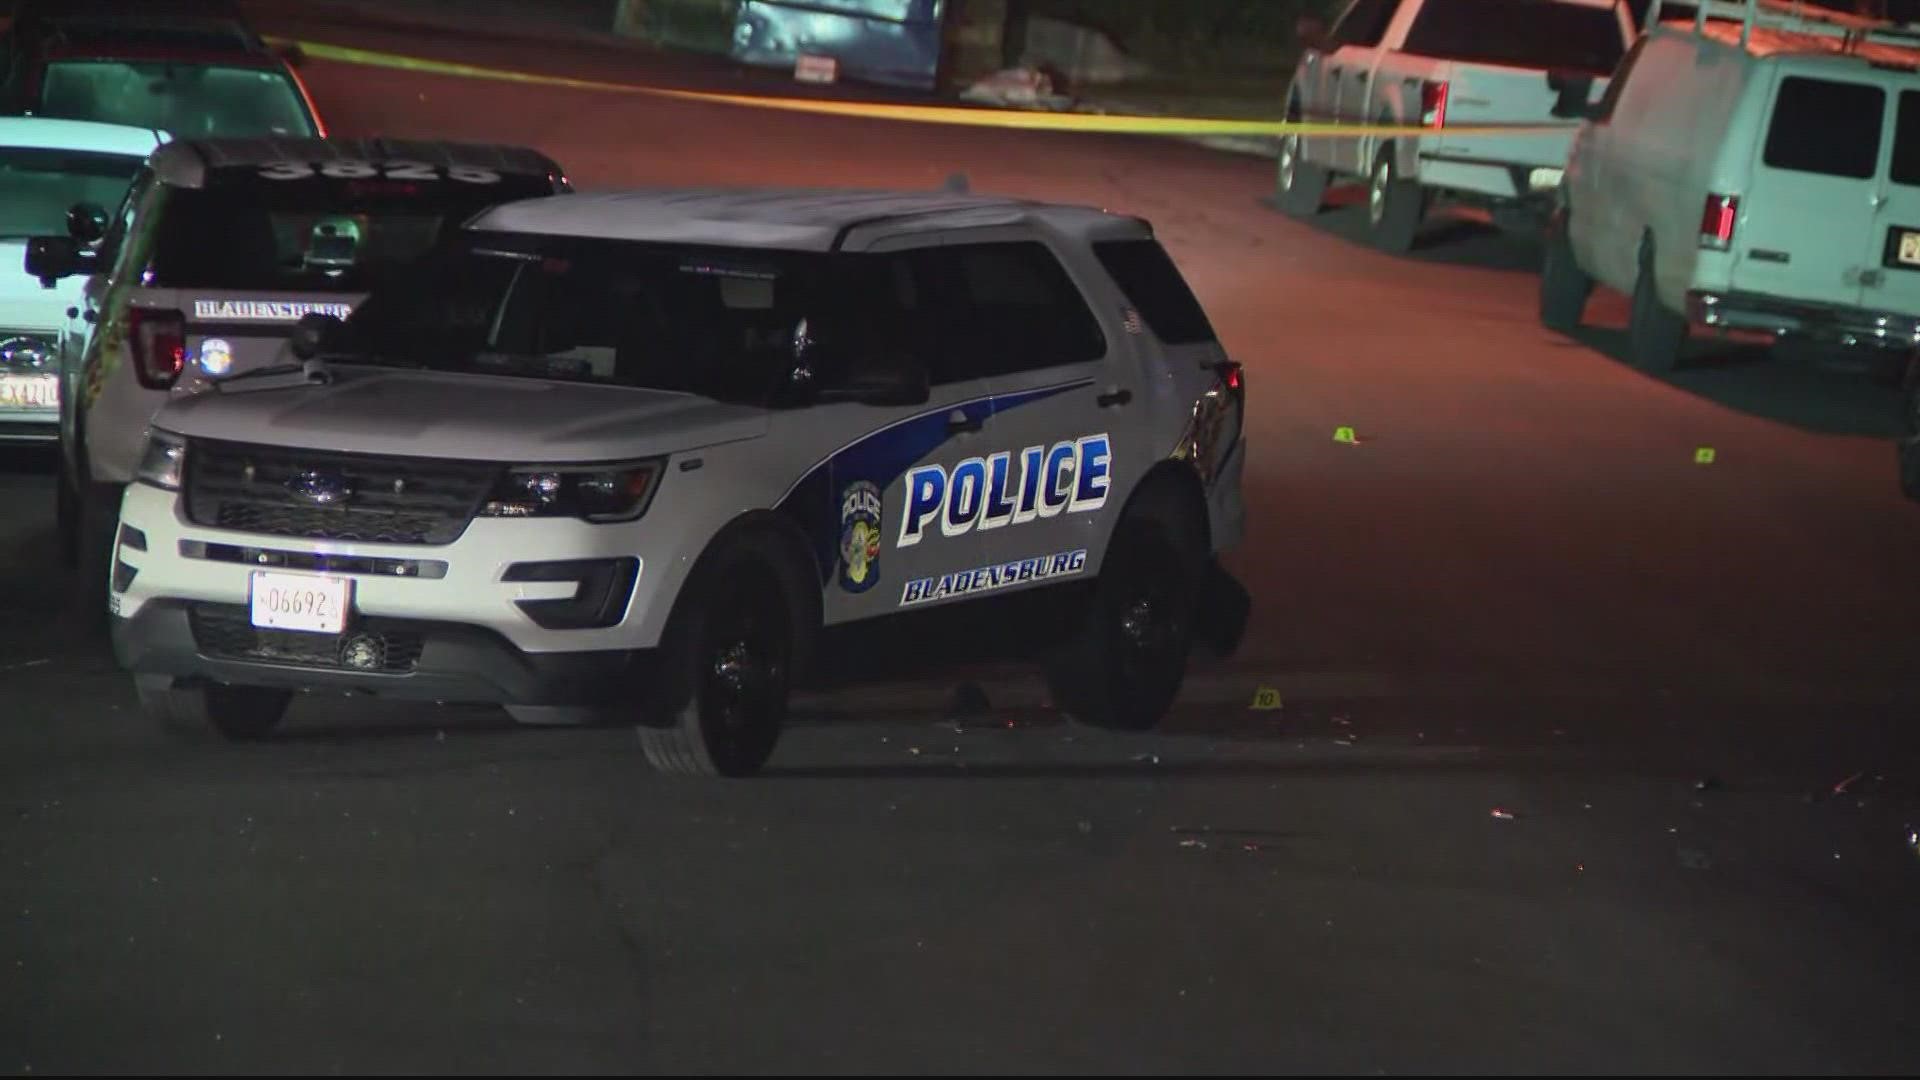 Bladensburg Police officers were investigating a suspicious situation with two people, which led to officers firing shots and initiated a police pursuit late Sunday